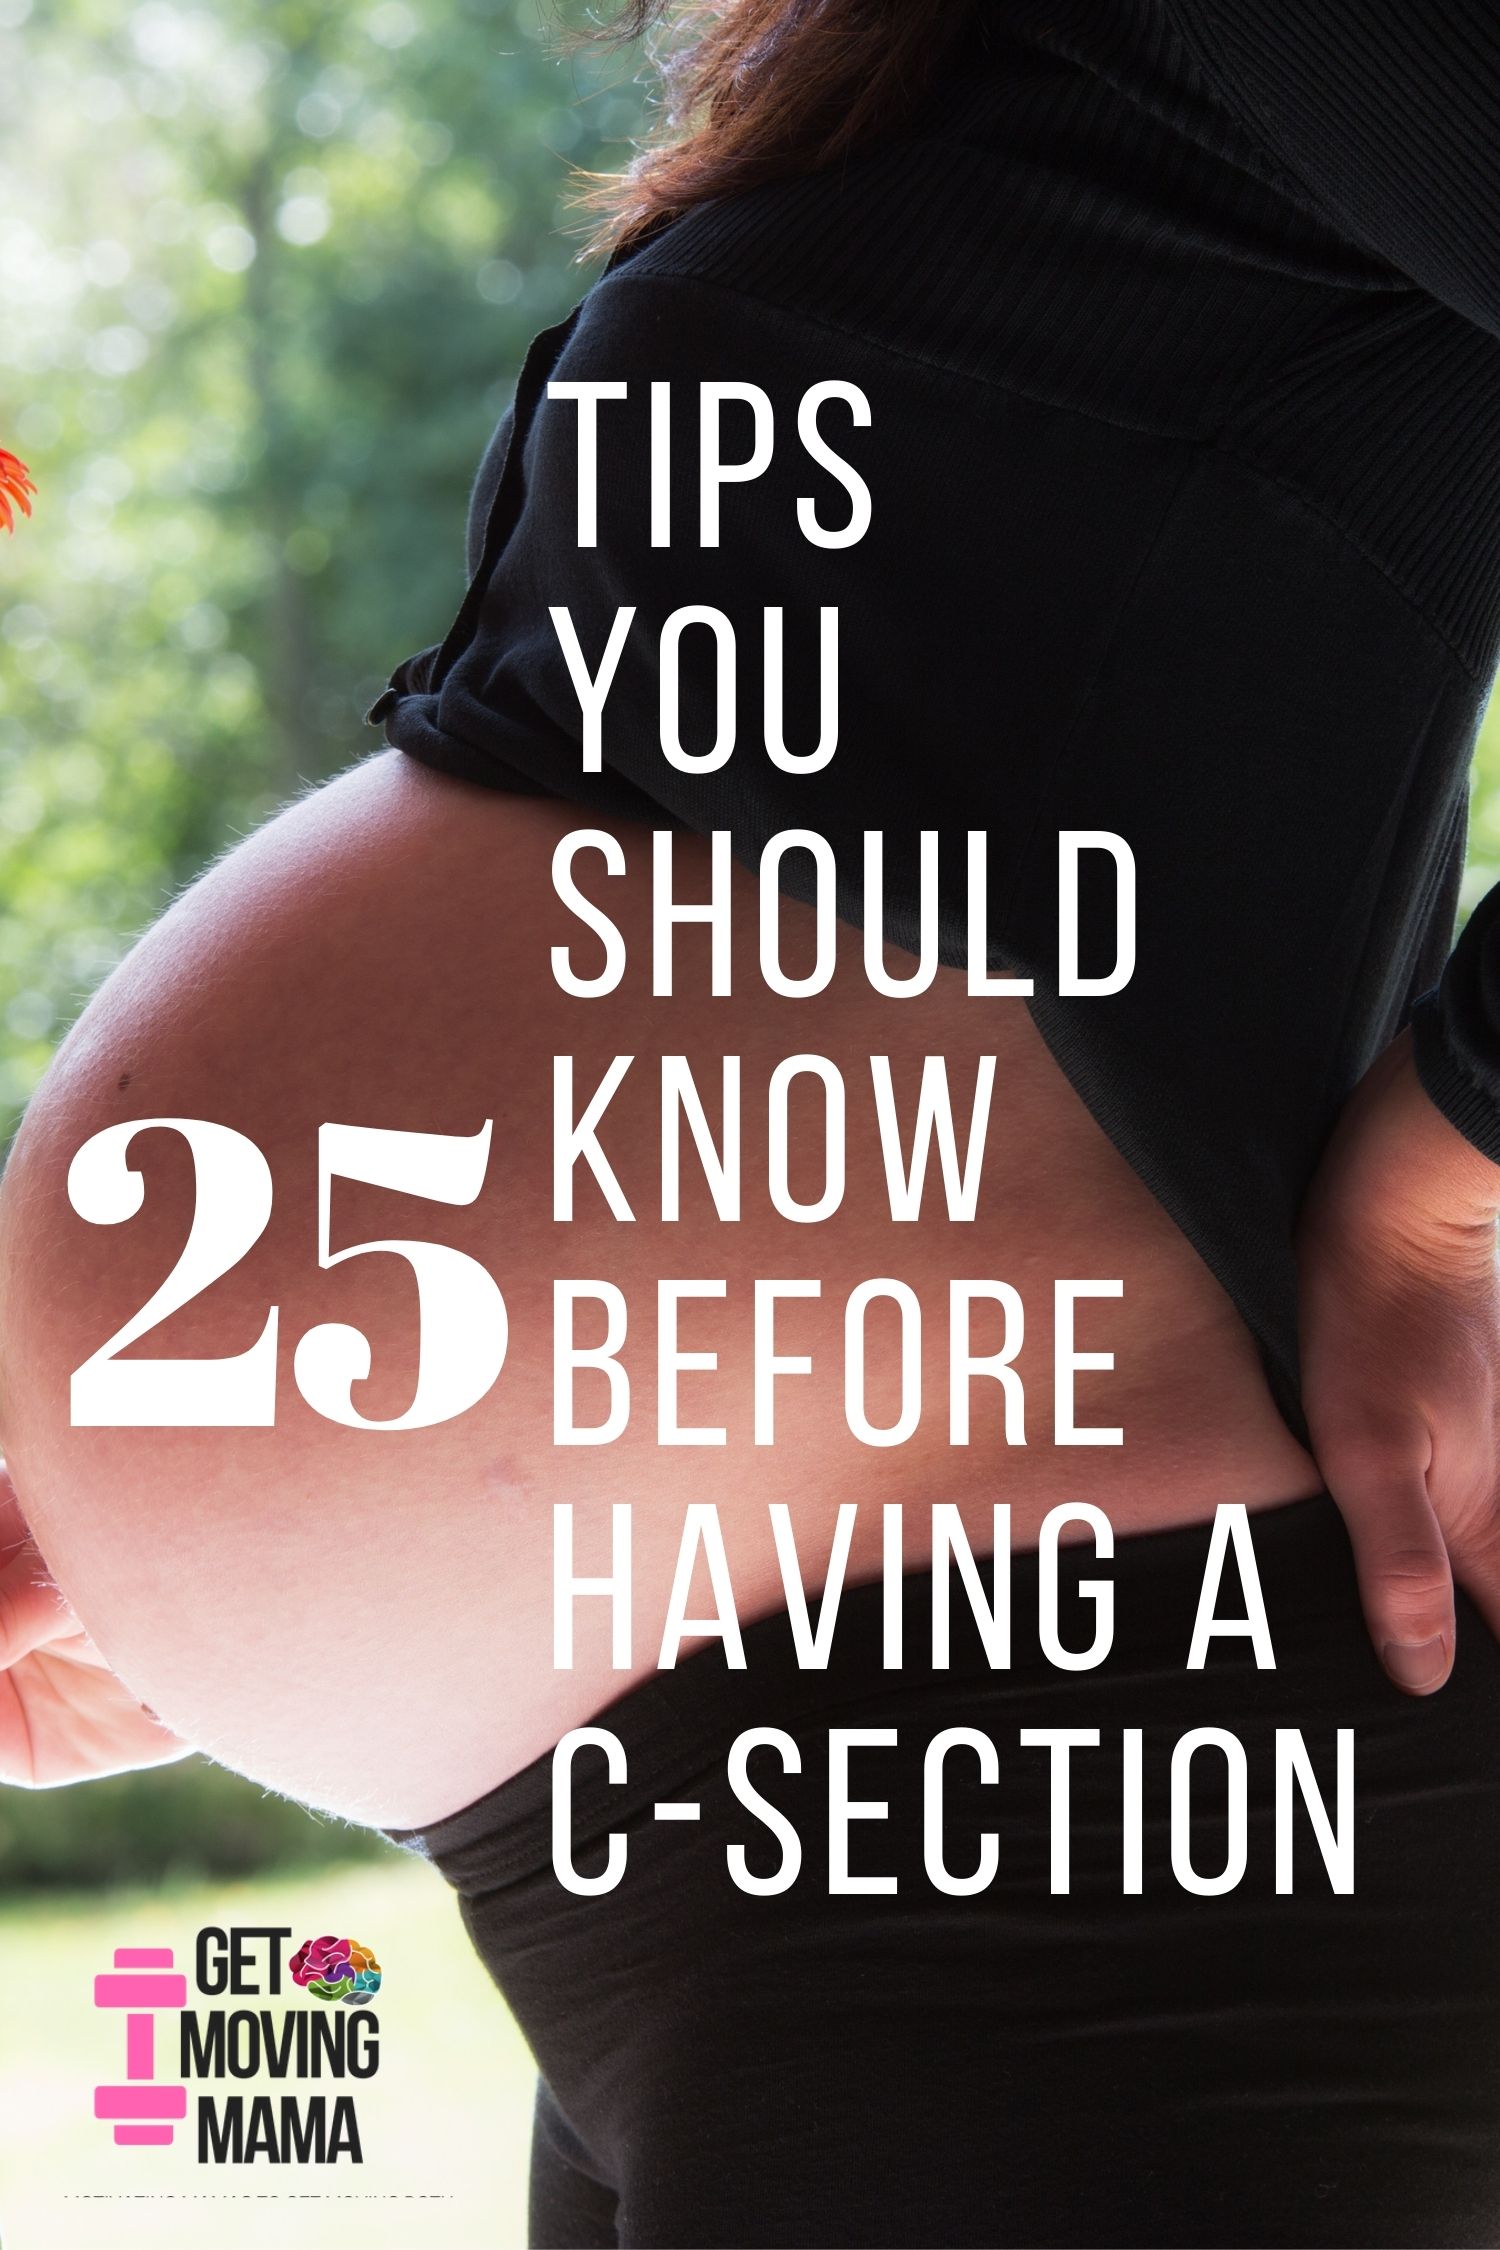 25 tips you should know before having a c-section